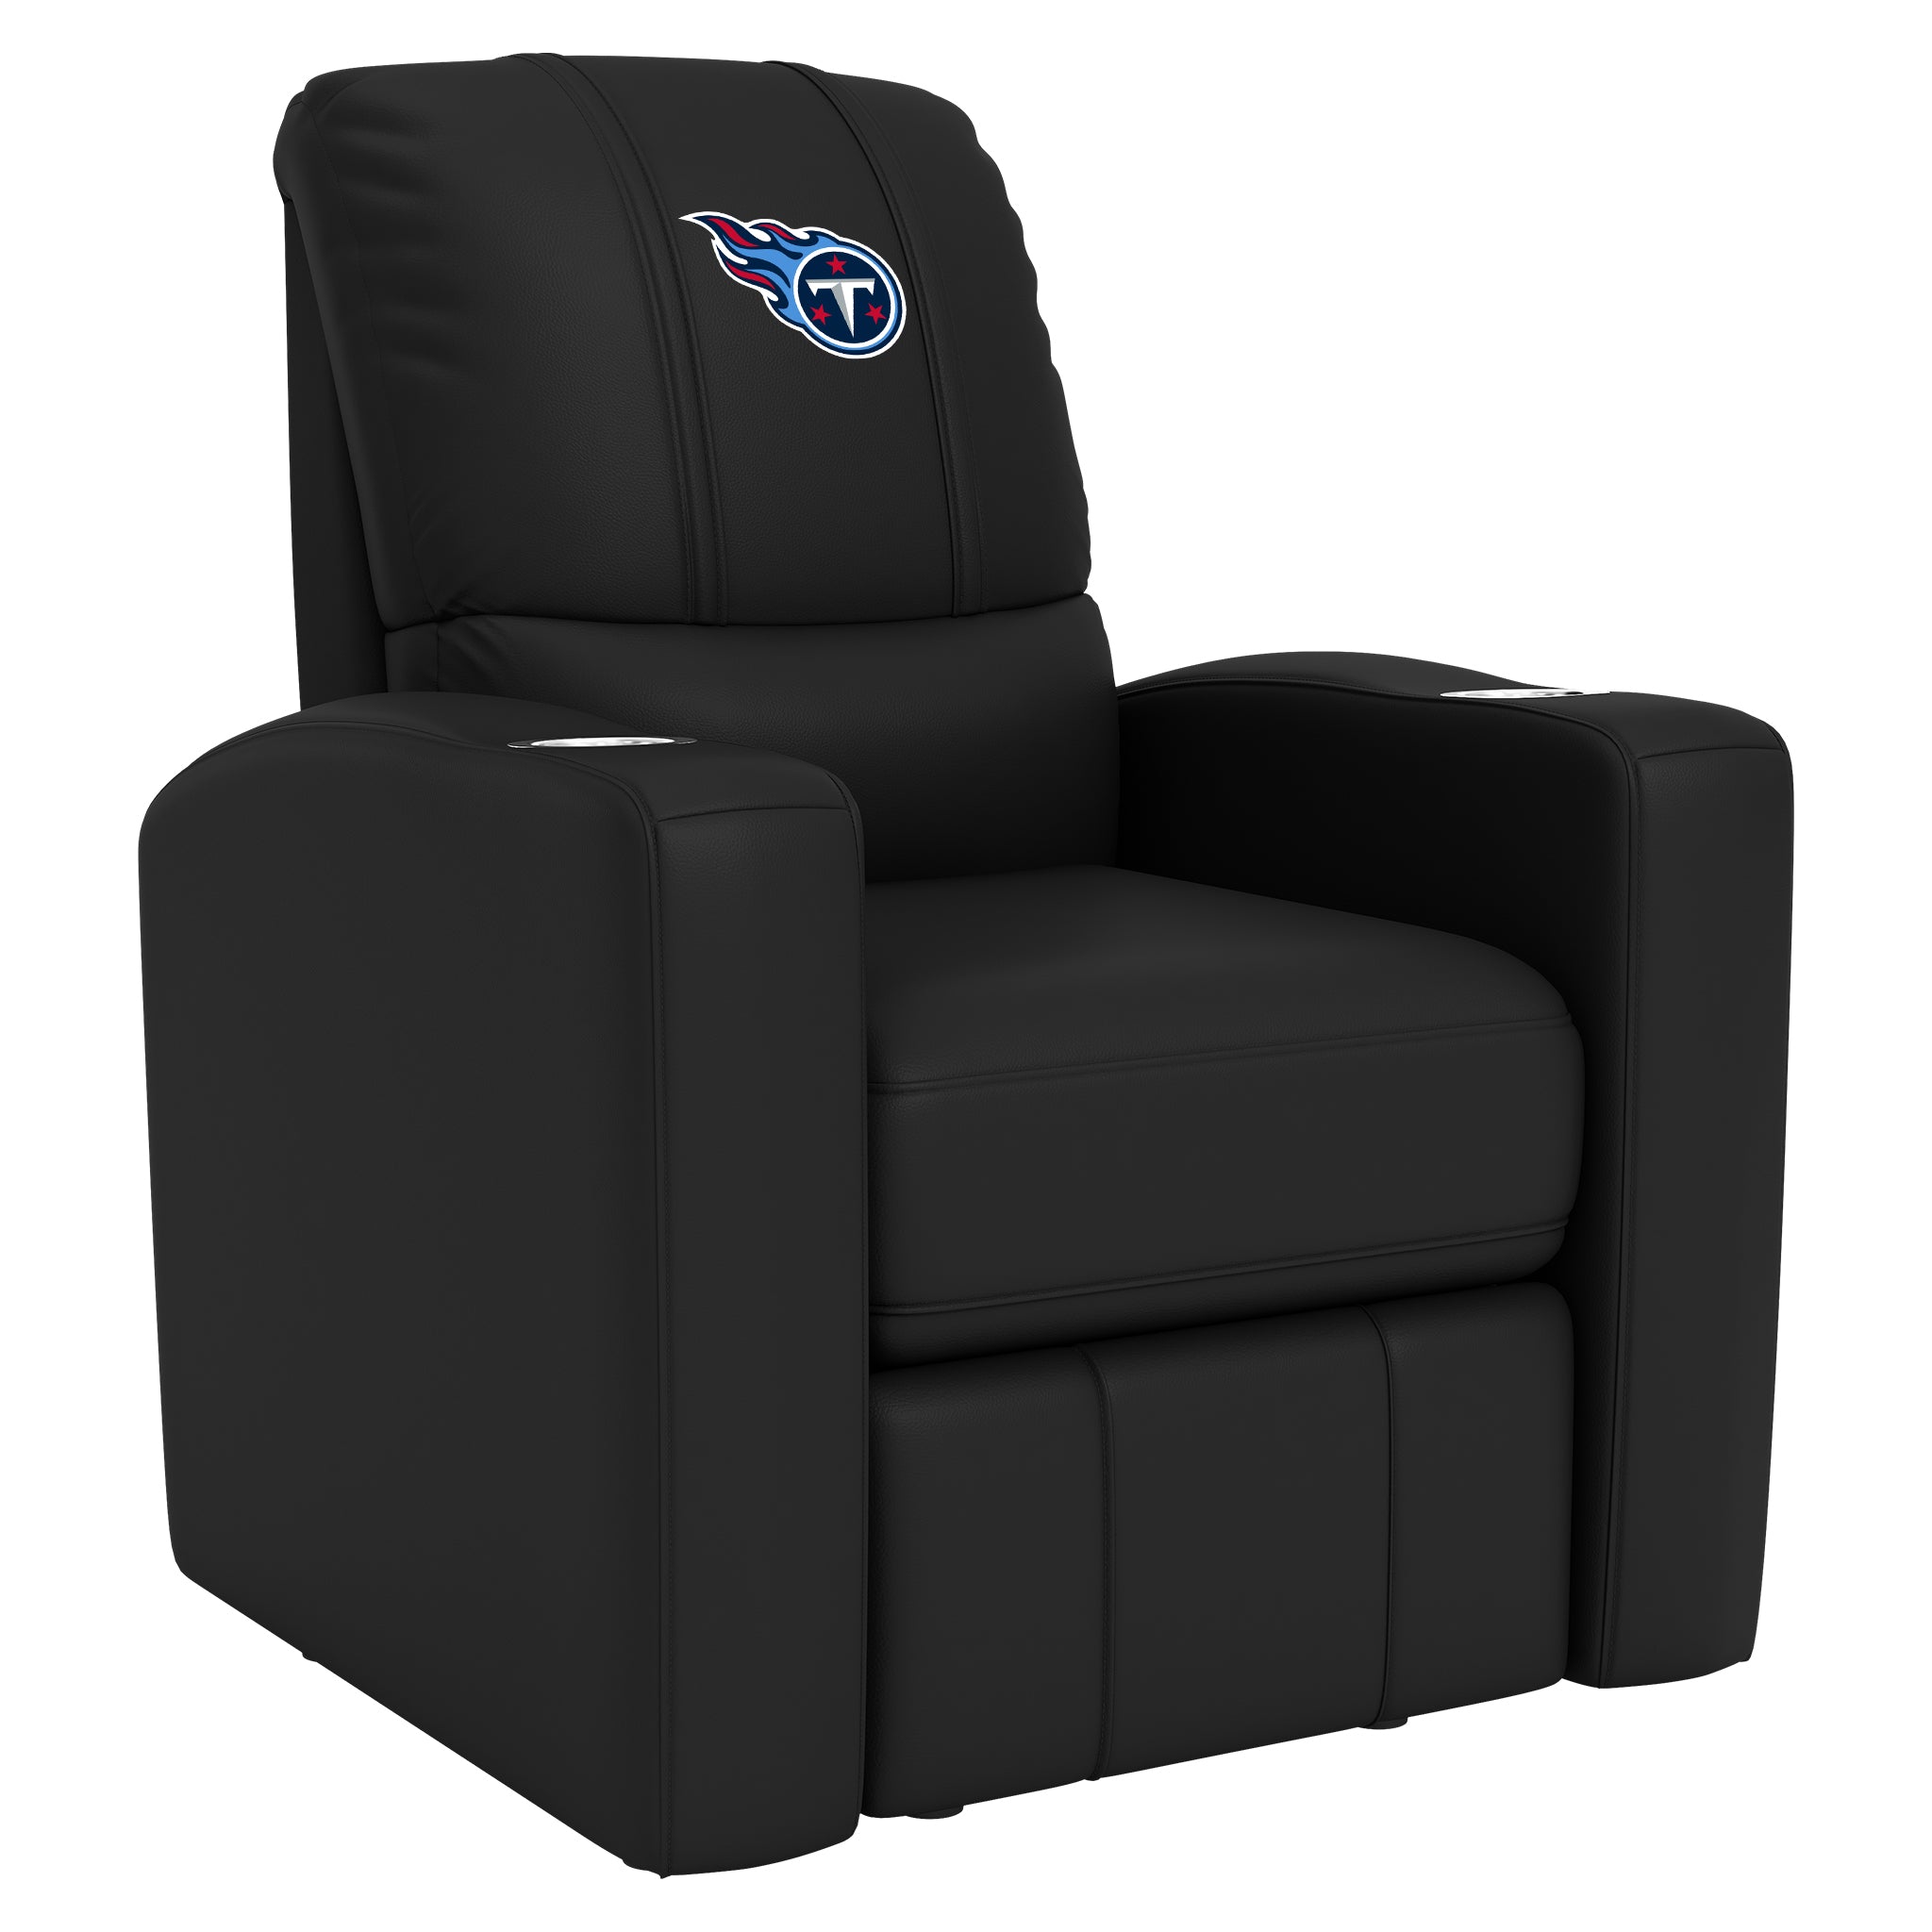 Tennessee Titans Stealth Recliner Manual